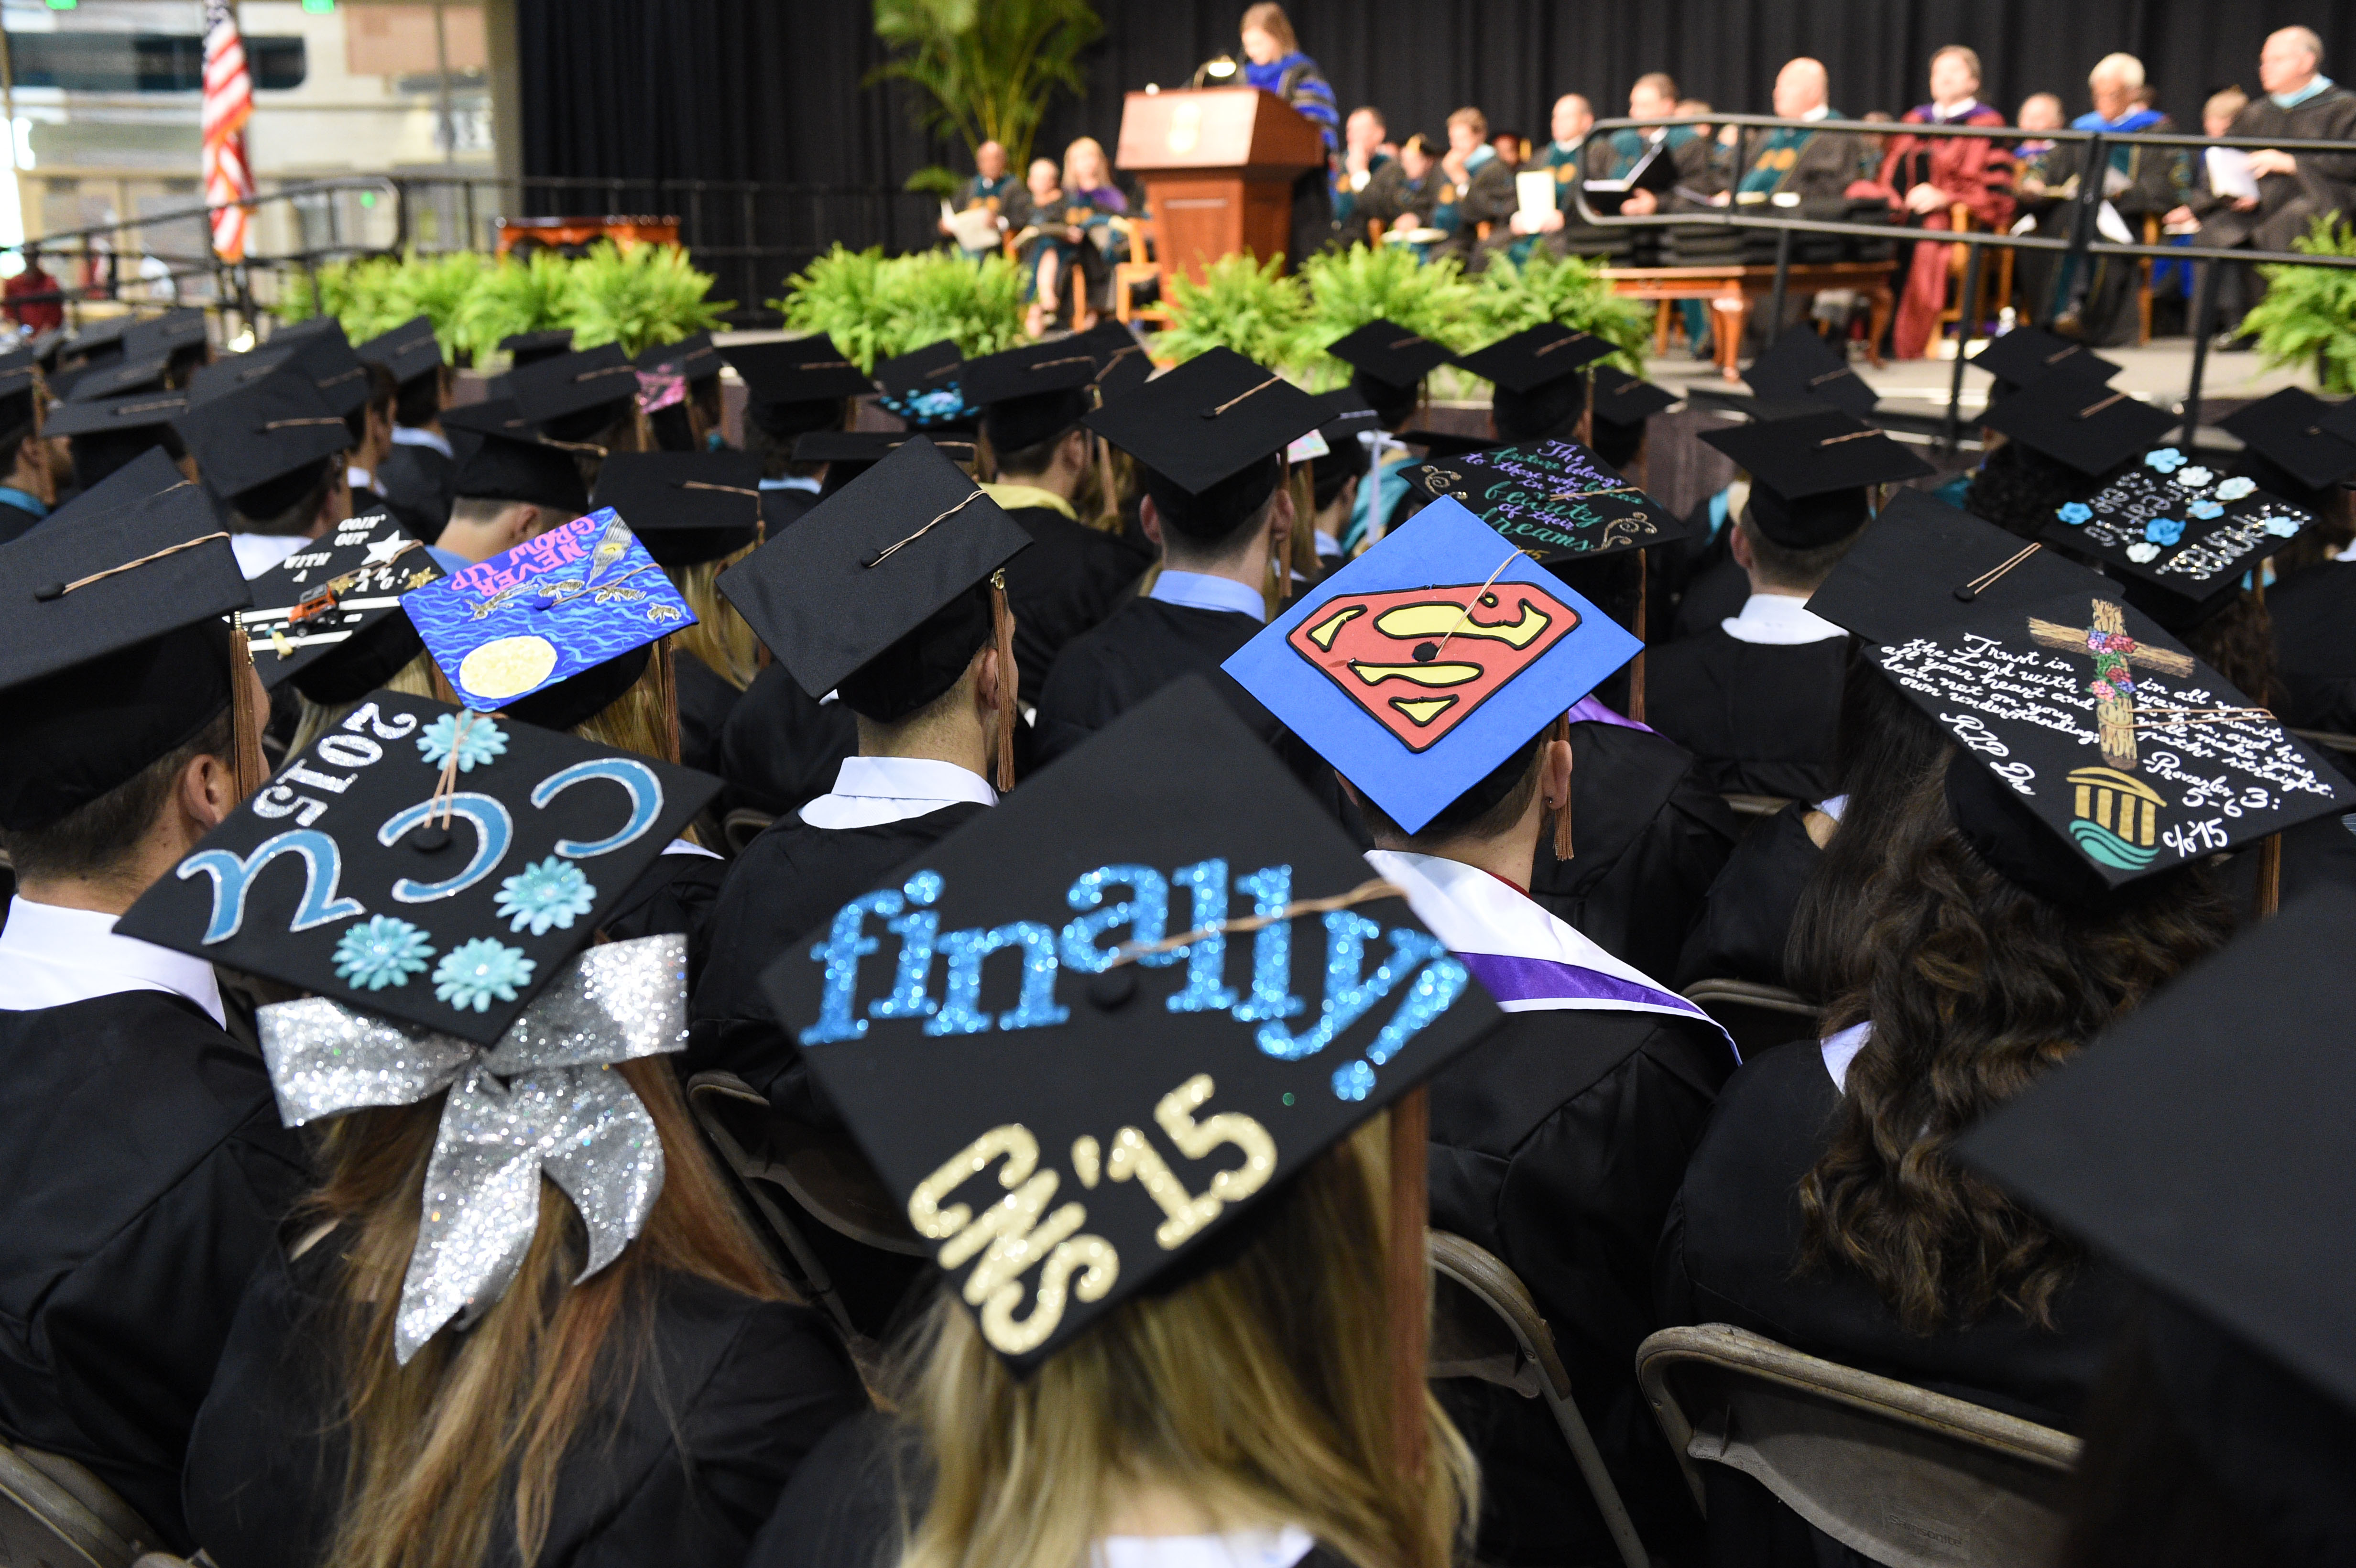 Our students go all out decorating their graduation caps. This photo was taken during the Wall College of Business graduation ceremony on Friday.